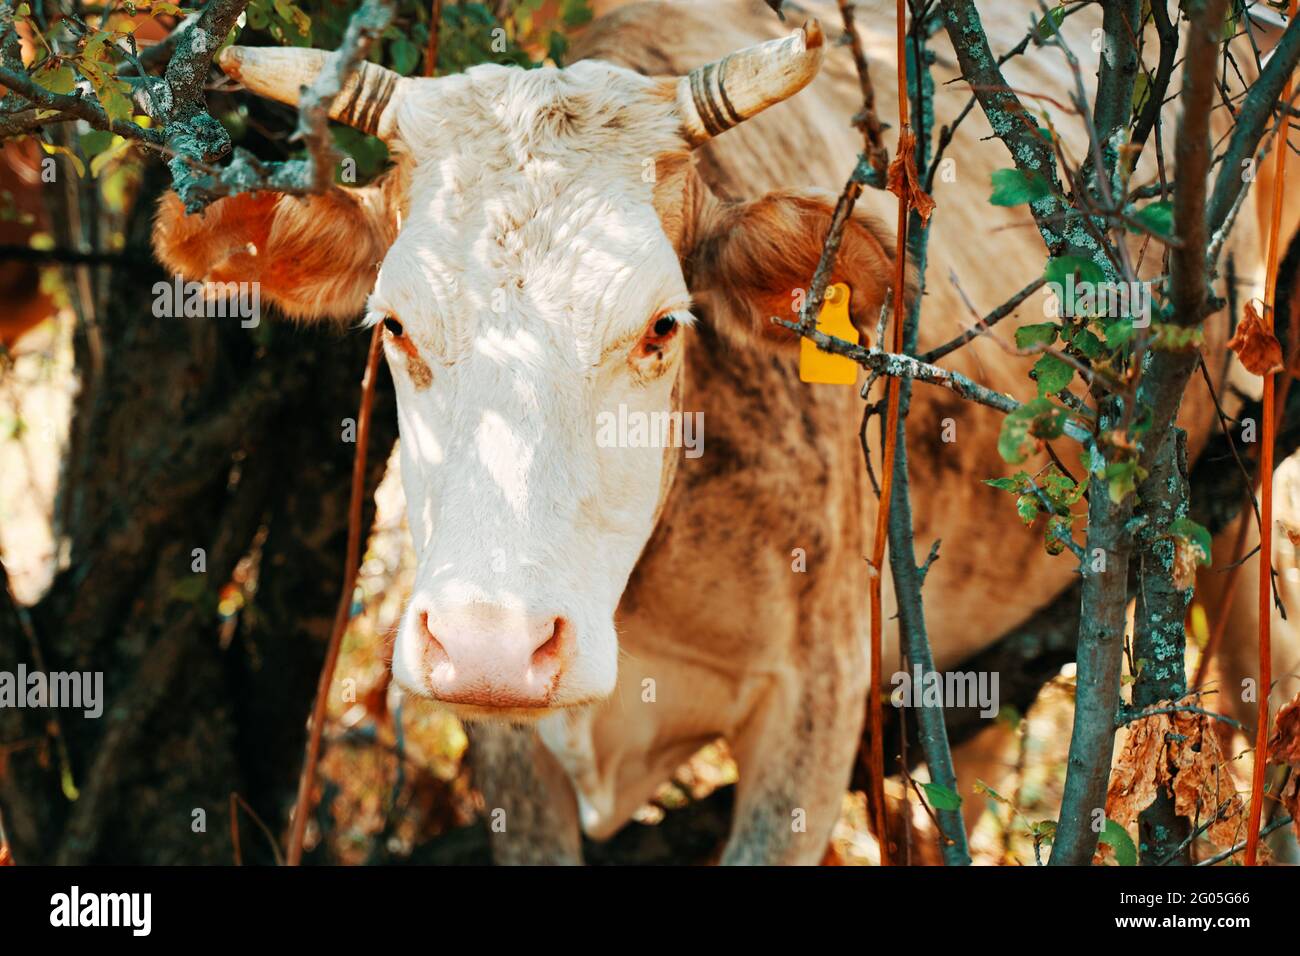 Cow with ear tags. Bovine was stuck in the trees. Close up. Curious horned pet. Domestic farm animals. Stock Photo